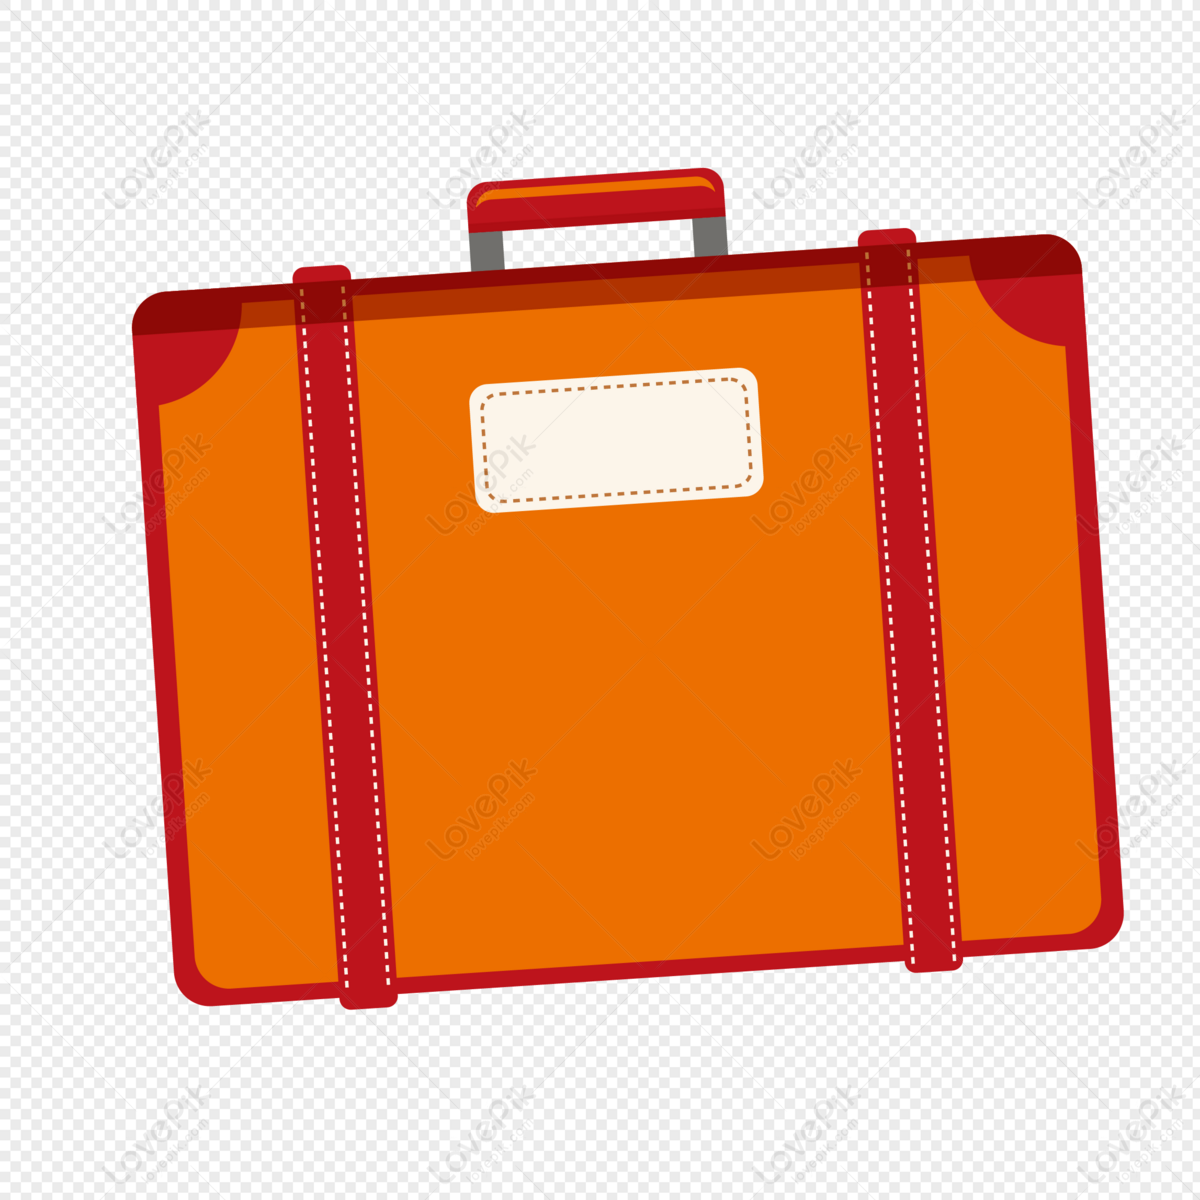 briefcase-png-images-with-transparent-background-free-download-on